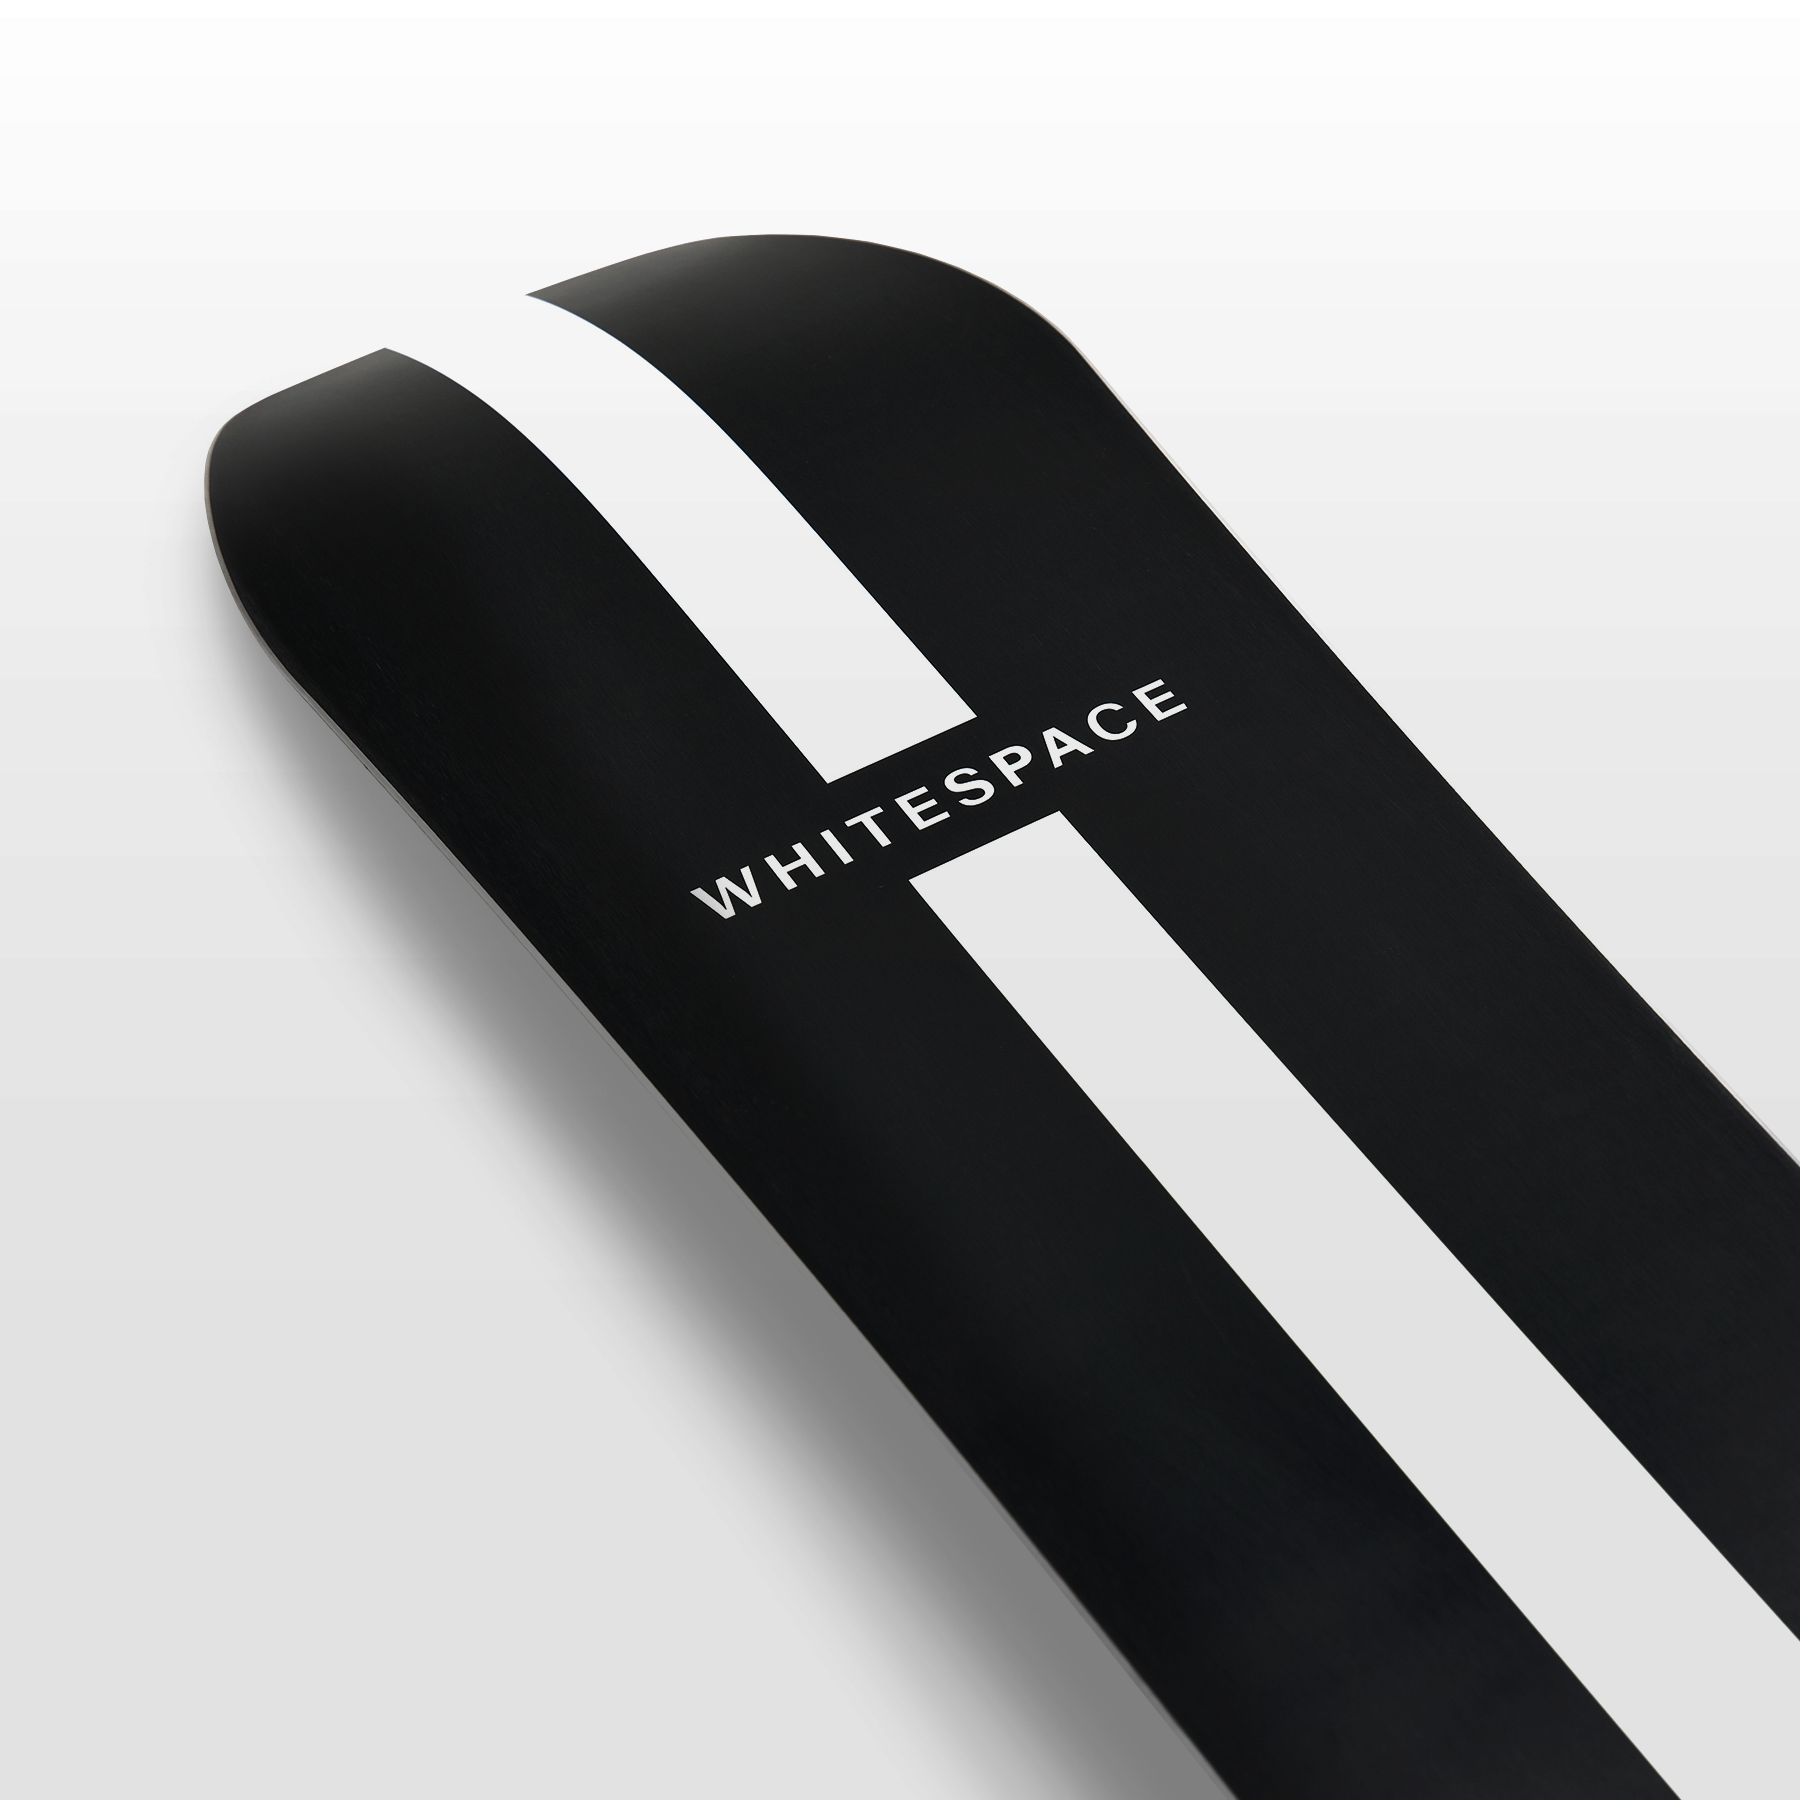 Shaun White Explains The Design Ethos Behind His New Brand WHITESPACE -  Unofficial Networks